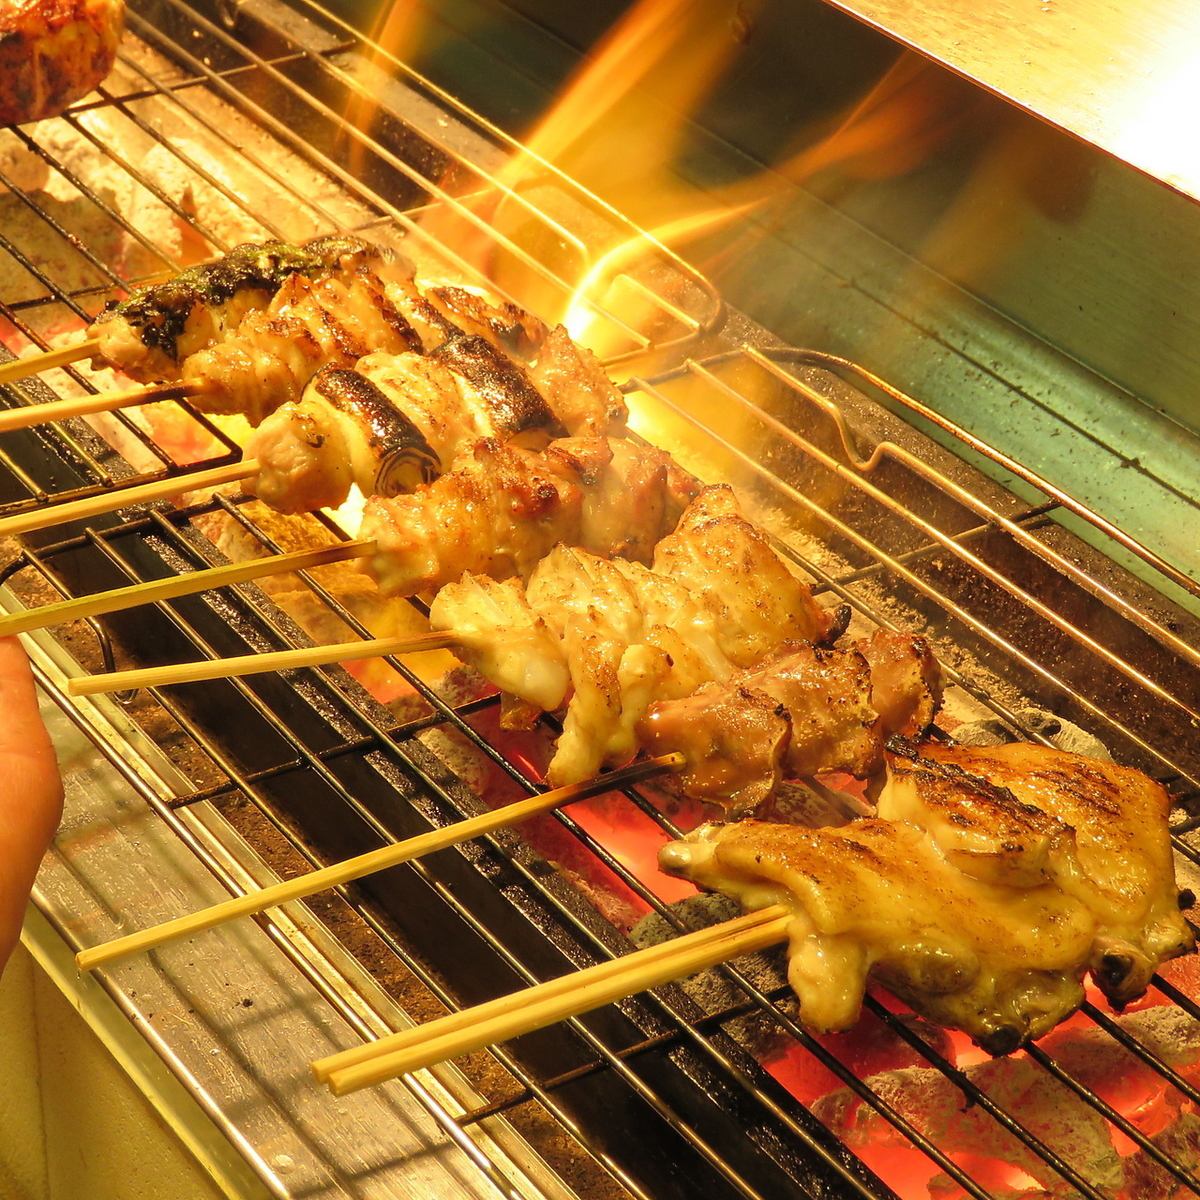 The pride of grilling each one carefully over charcoal is 150 yen (tax included) ~!